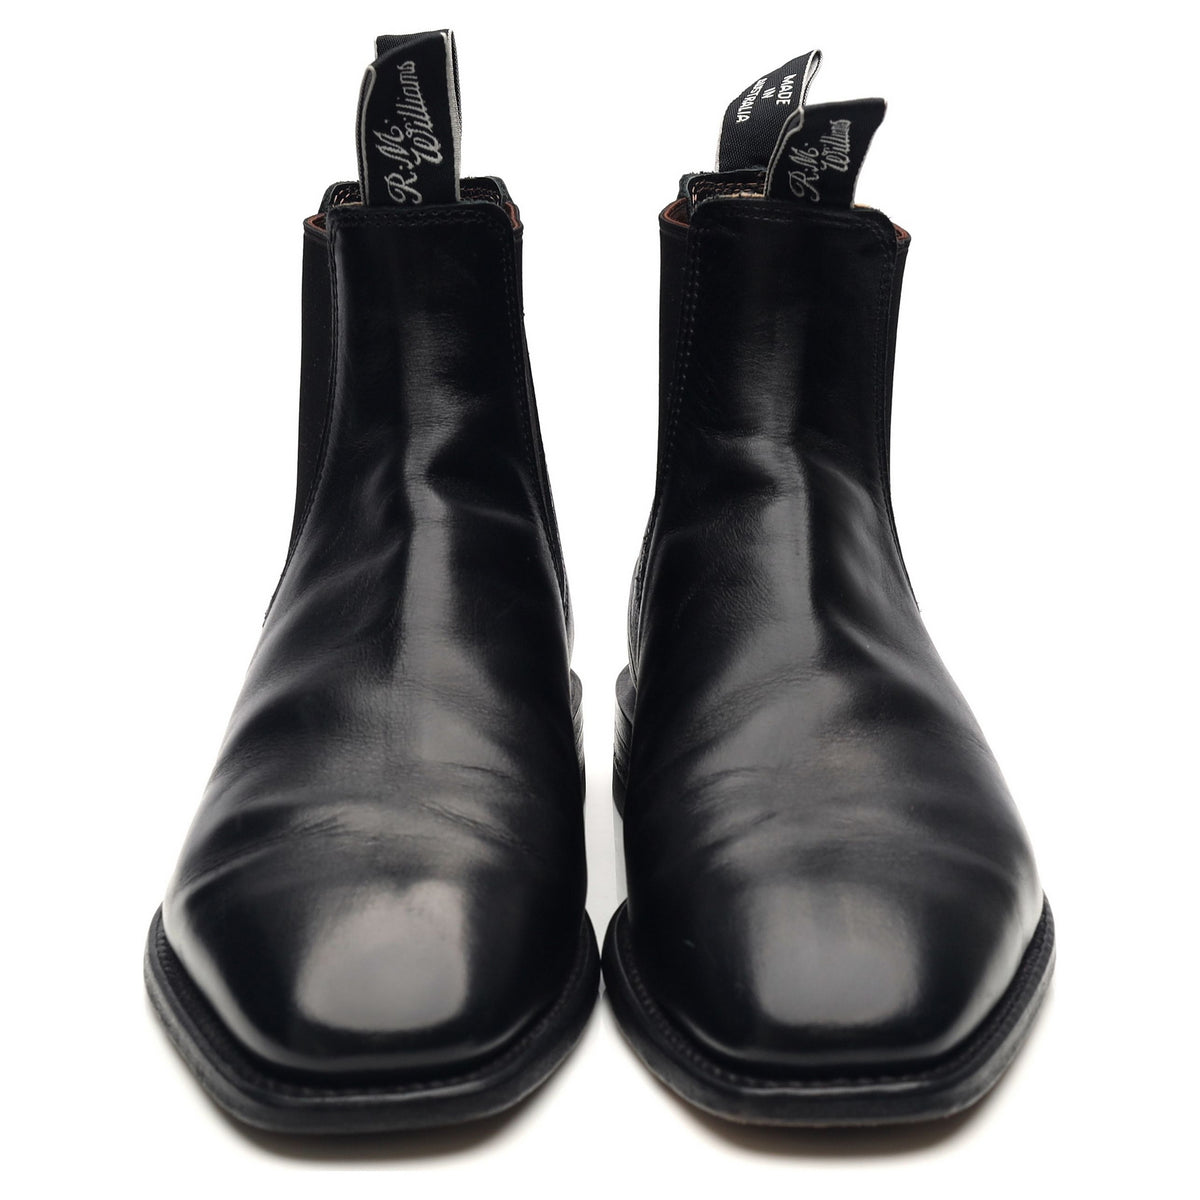 RM Williams Craftsman Black Leather Chelsea Boot Size UK 7.5 G | USA 8.5